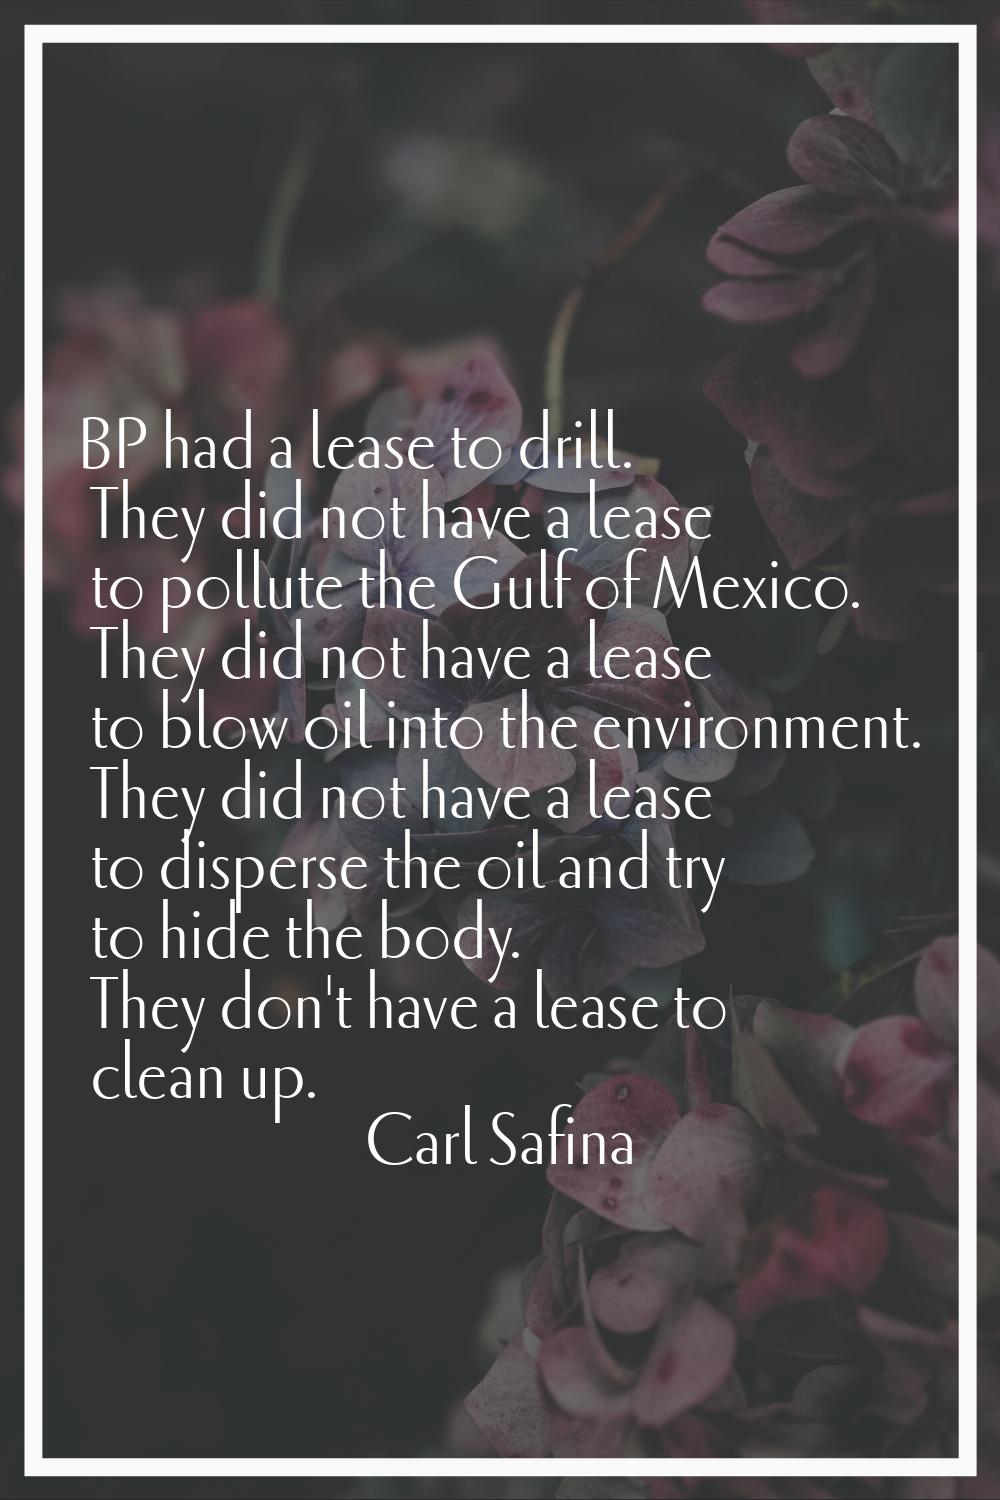 BP had a lease to drill. They did not have a lease to pollute the Gulf of Mexico. They did not have